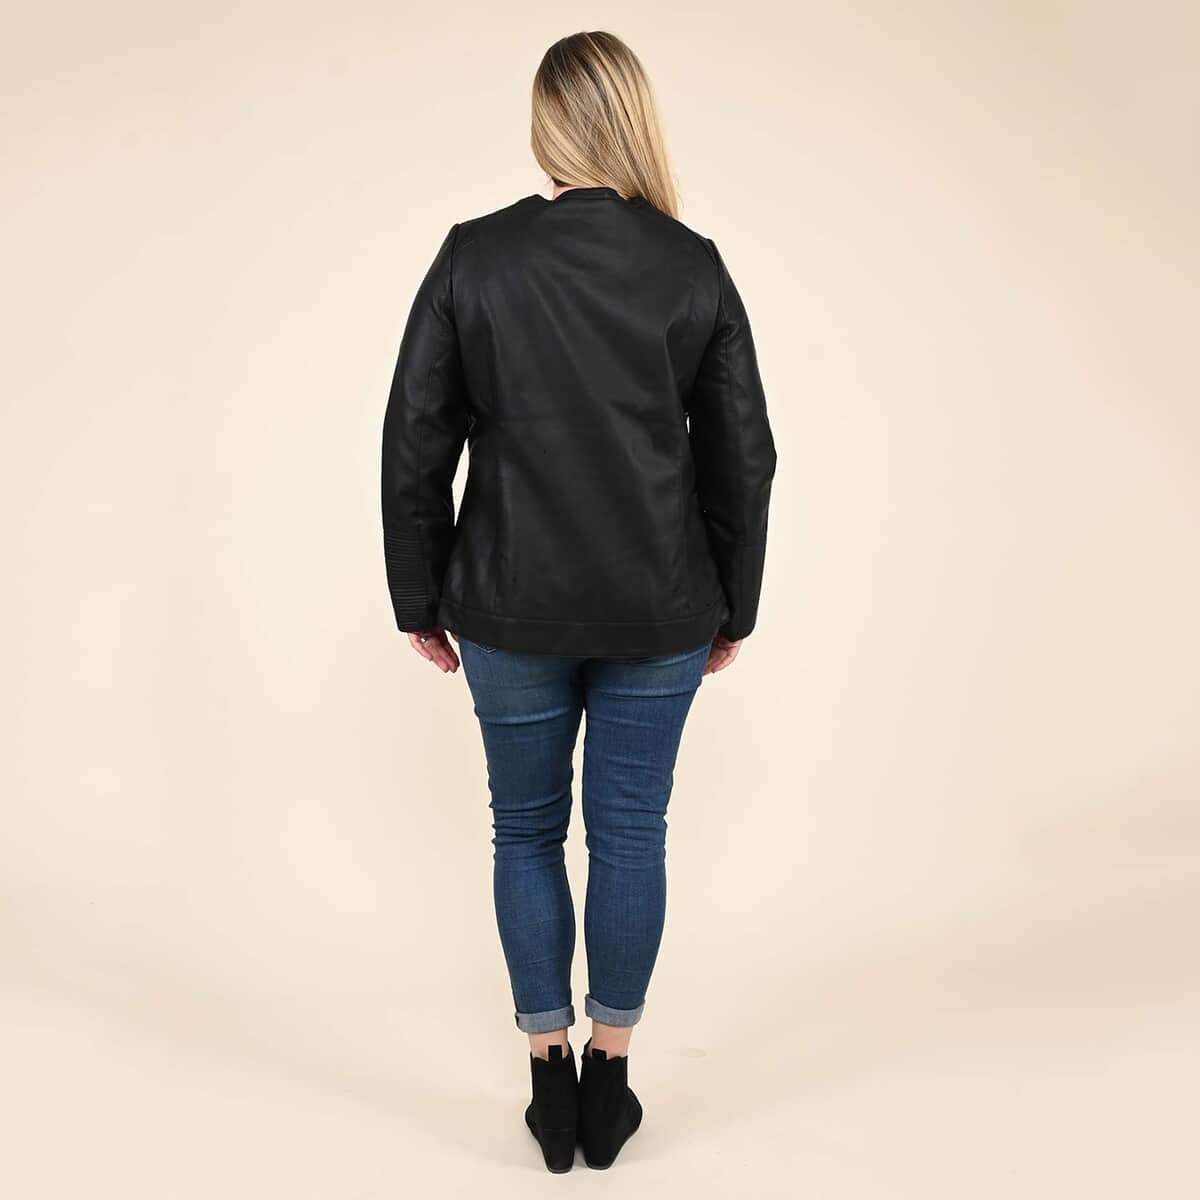 TAMSY Black Faux Leather Zip-Up Motorcycle Jacket - S image number 1